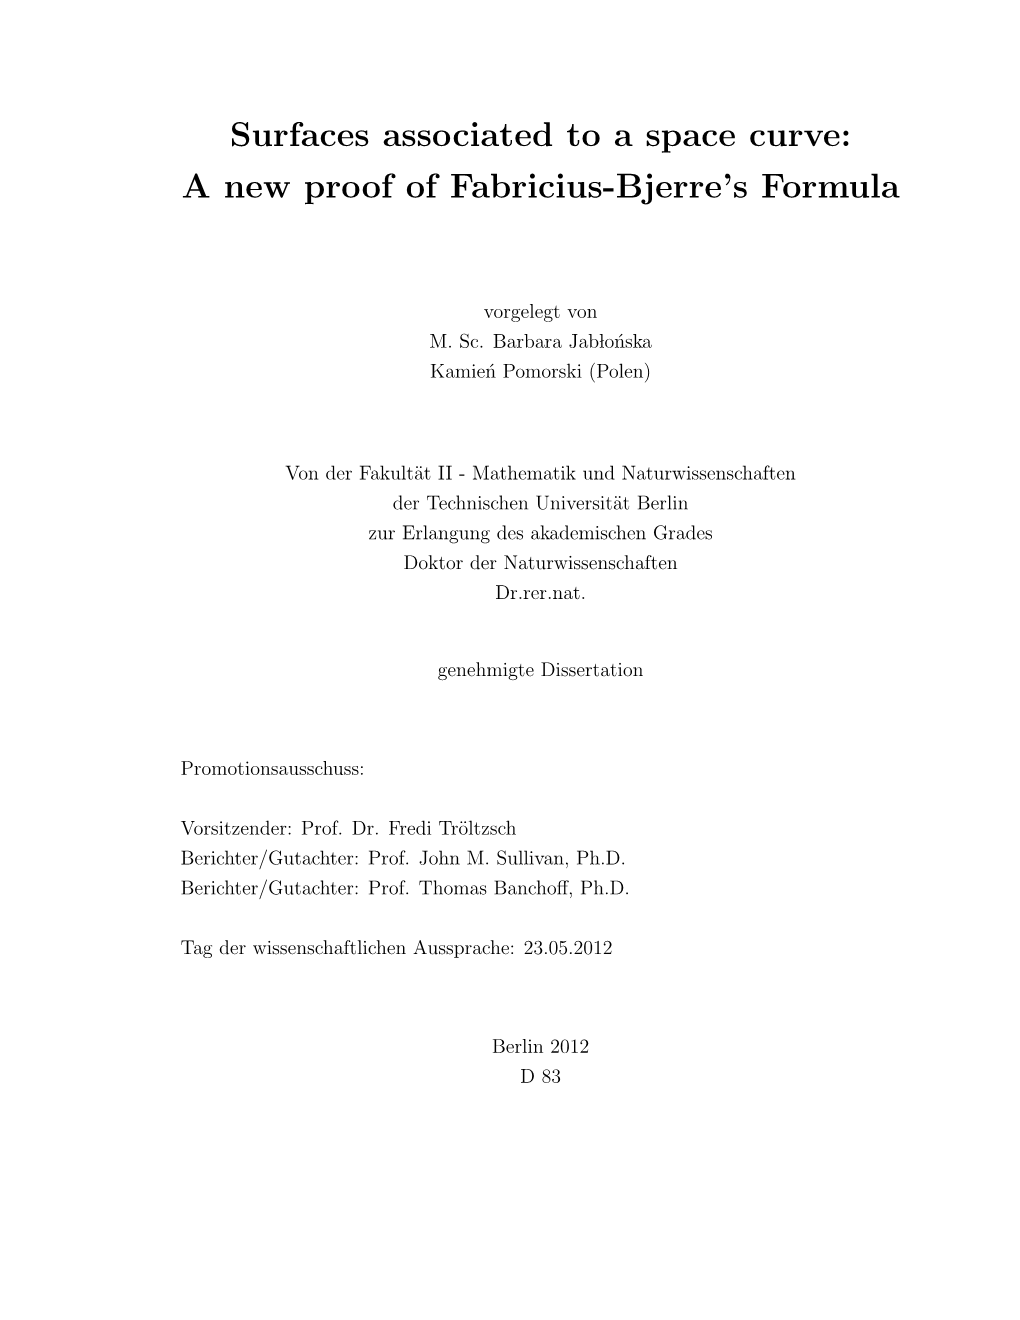 Surfaces Associated to a Space Curve: a New Proof of Fabricius-Bjerre's Formula